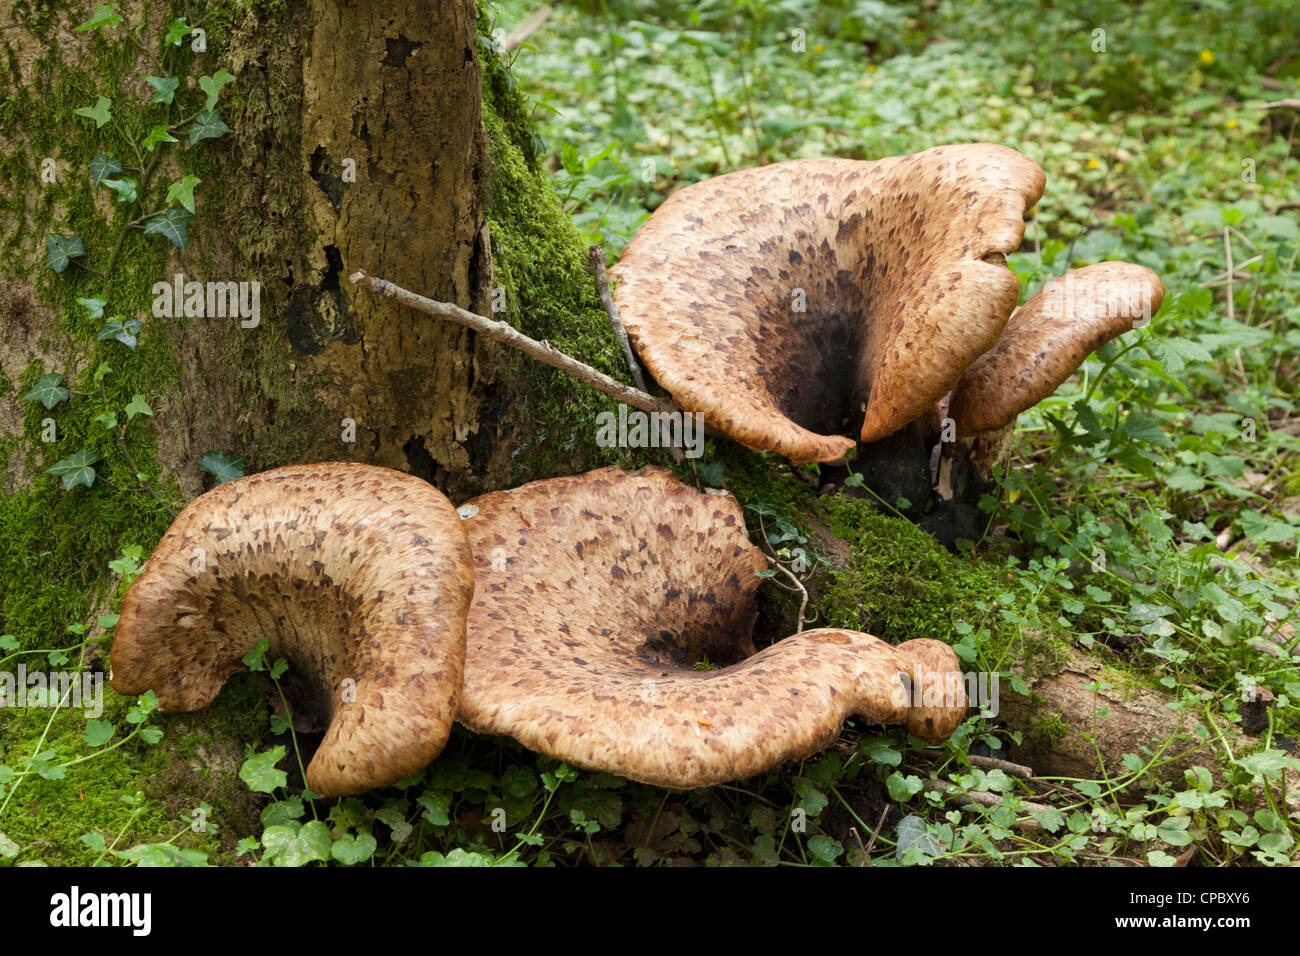 Polyporus Sqamosus fungi on dead tree trunk in forest Stock Photo